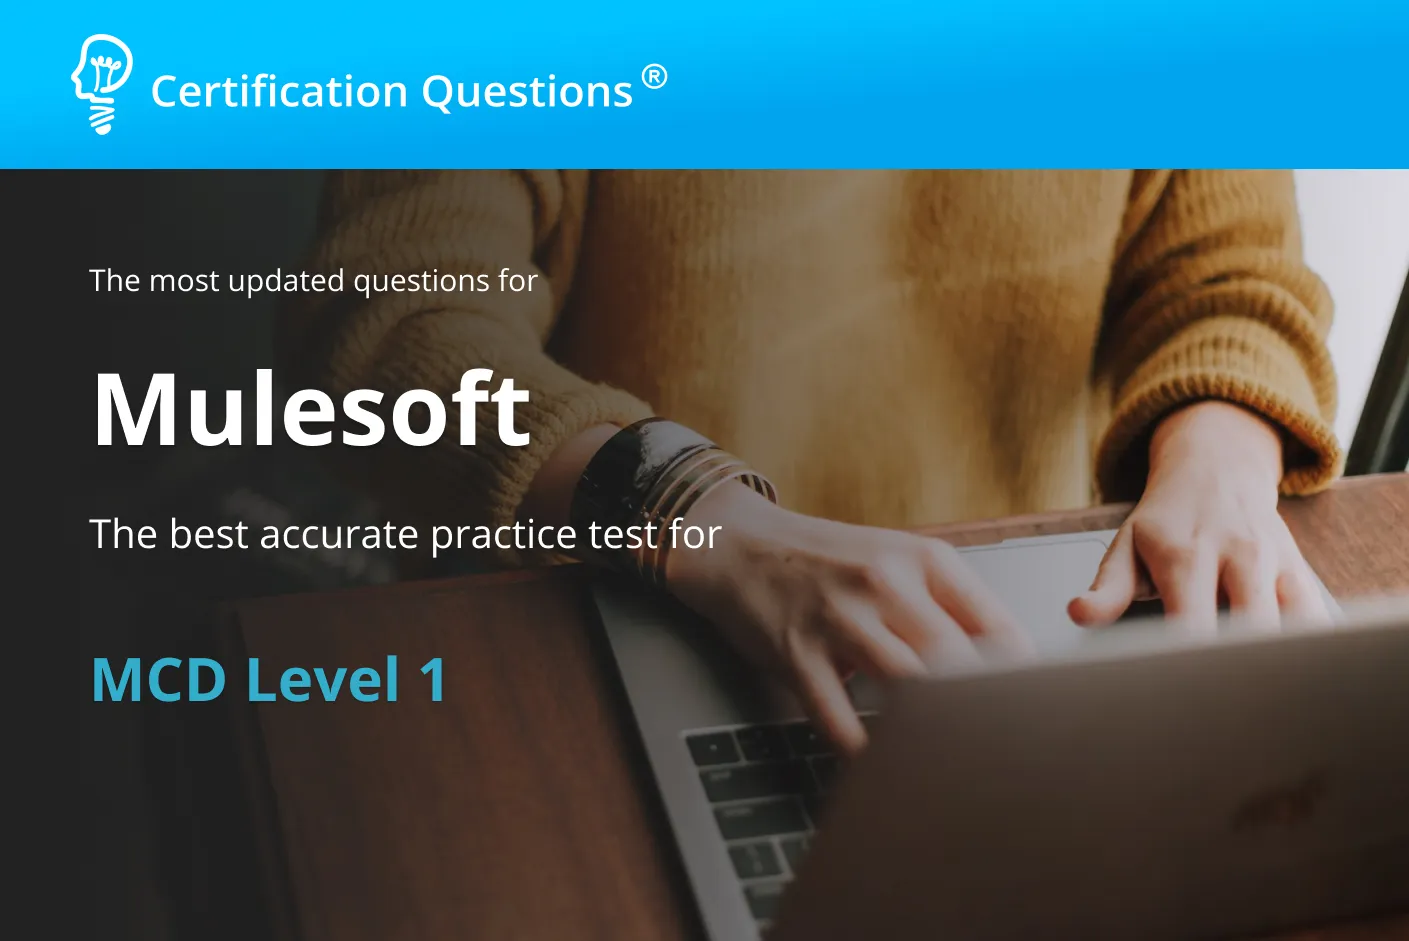 Learn about everything you need to know about the MCD Level 1 exam questions in the USA.